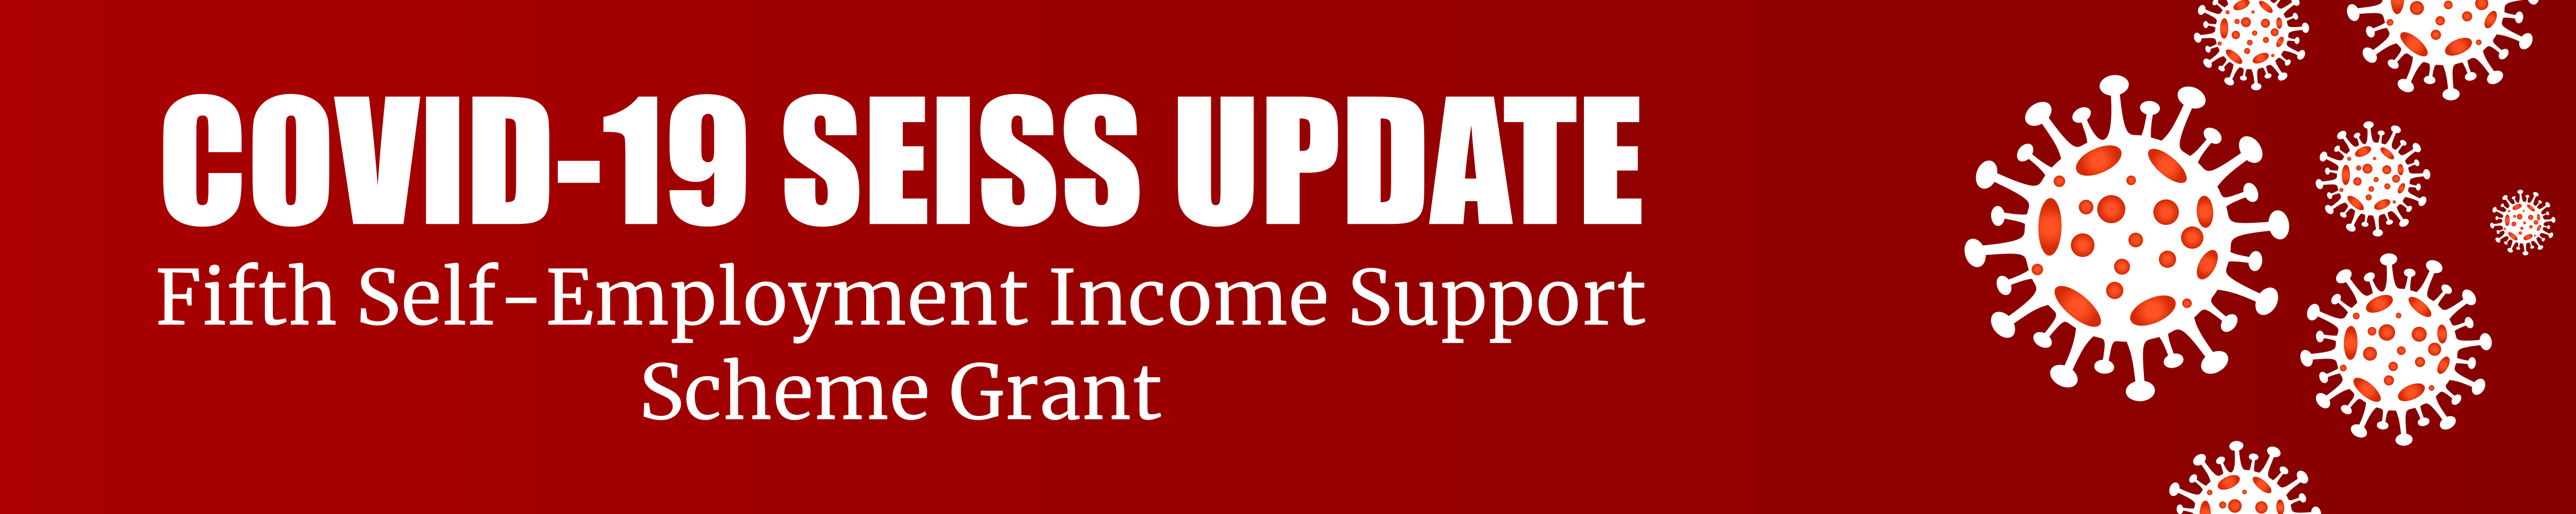 Fifth Self Employment Income Support Scheme Grant